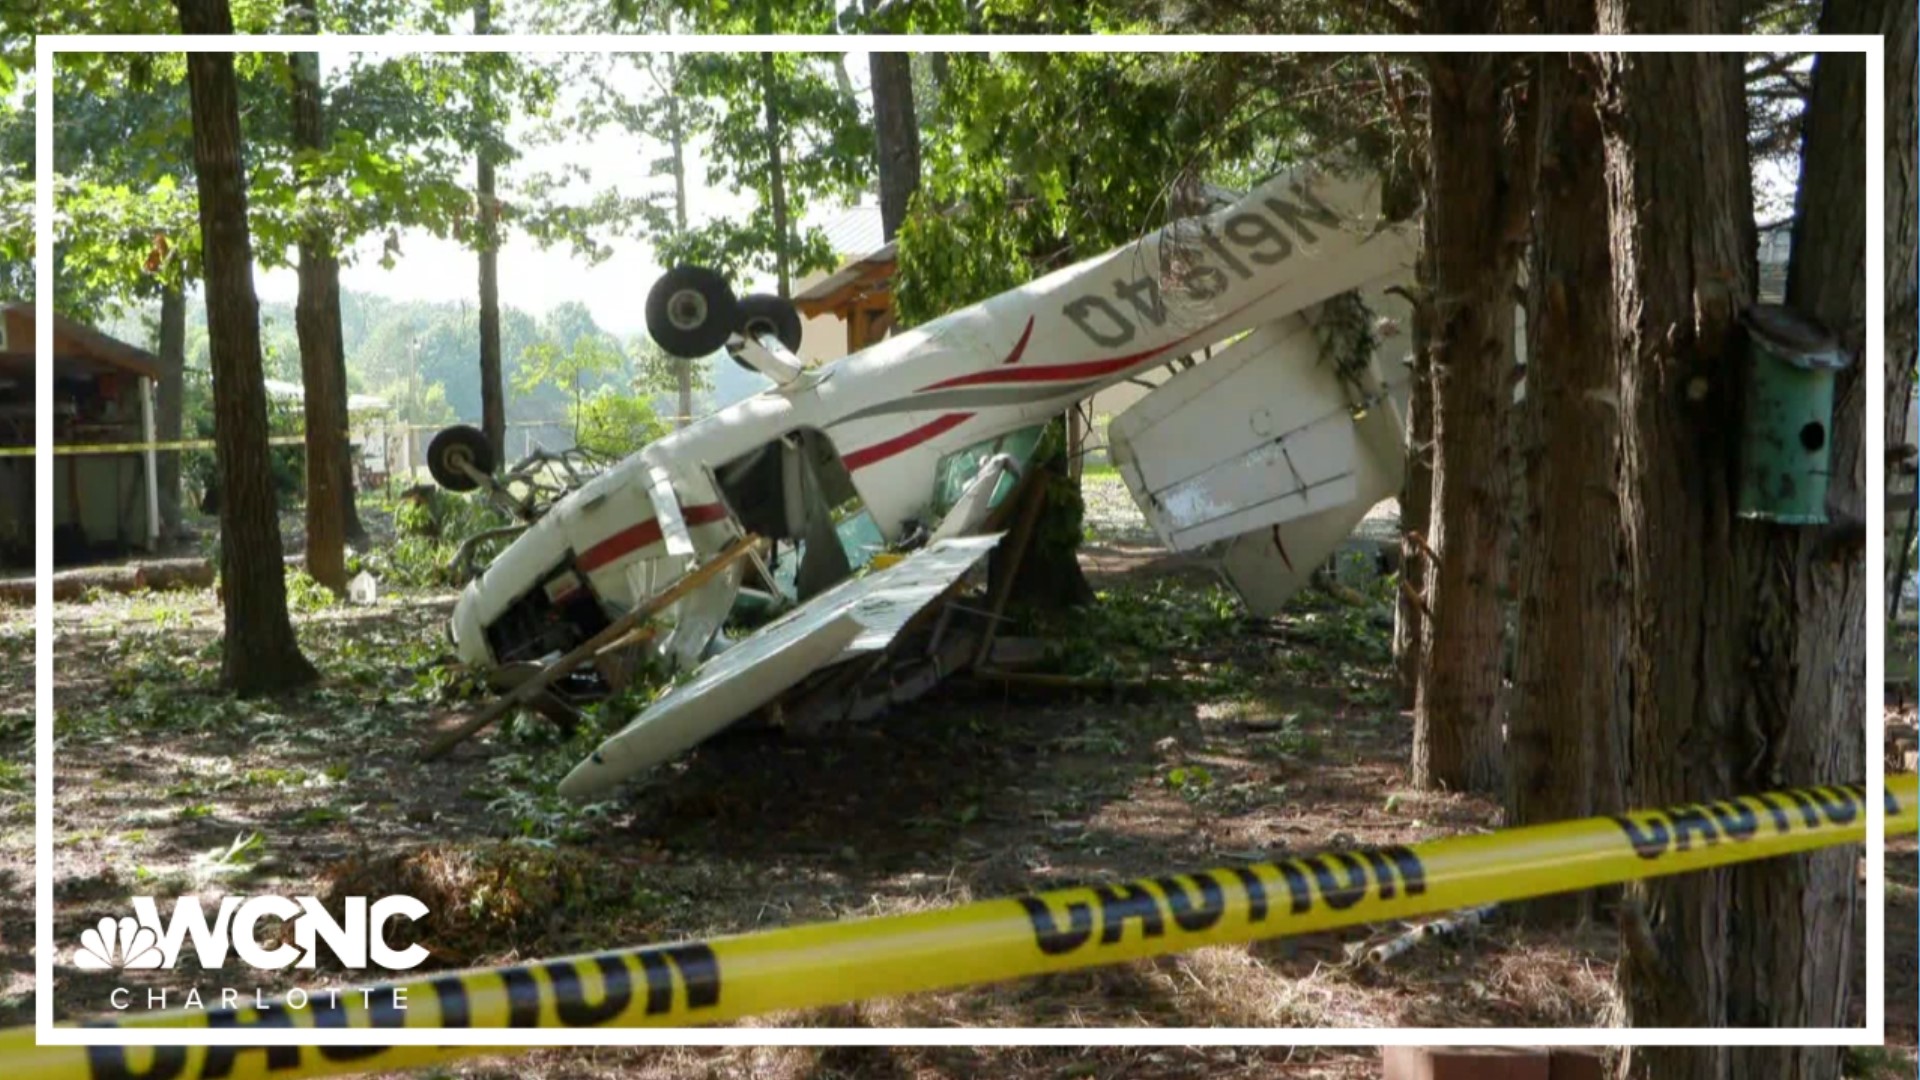 This is one of several small aircraft crashes WCNC Charlotte has reported on across the Carolinas in recent months.